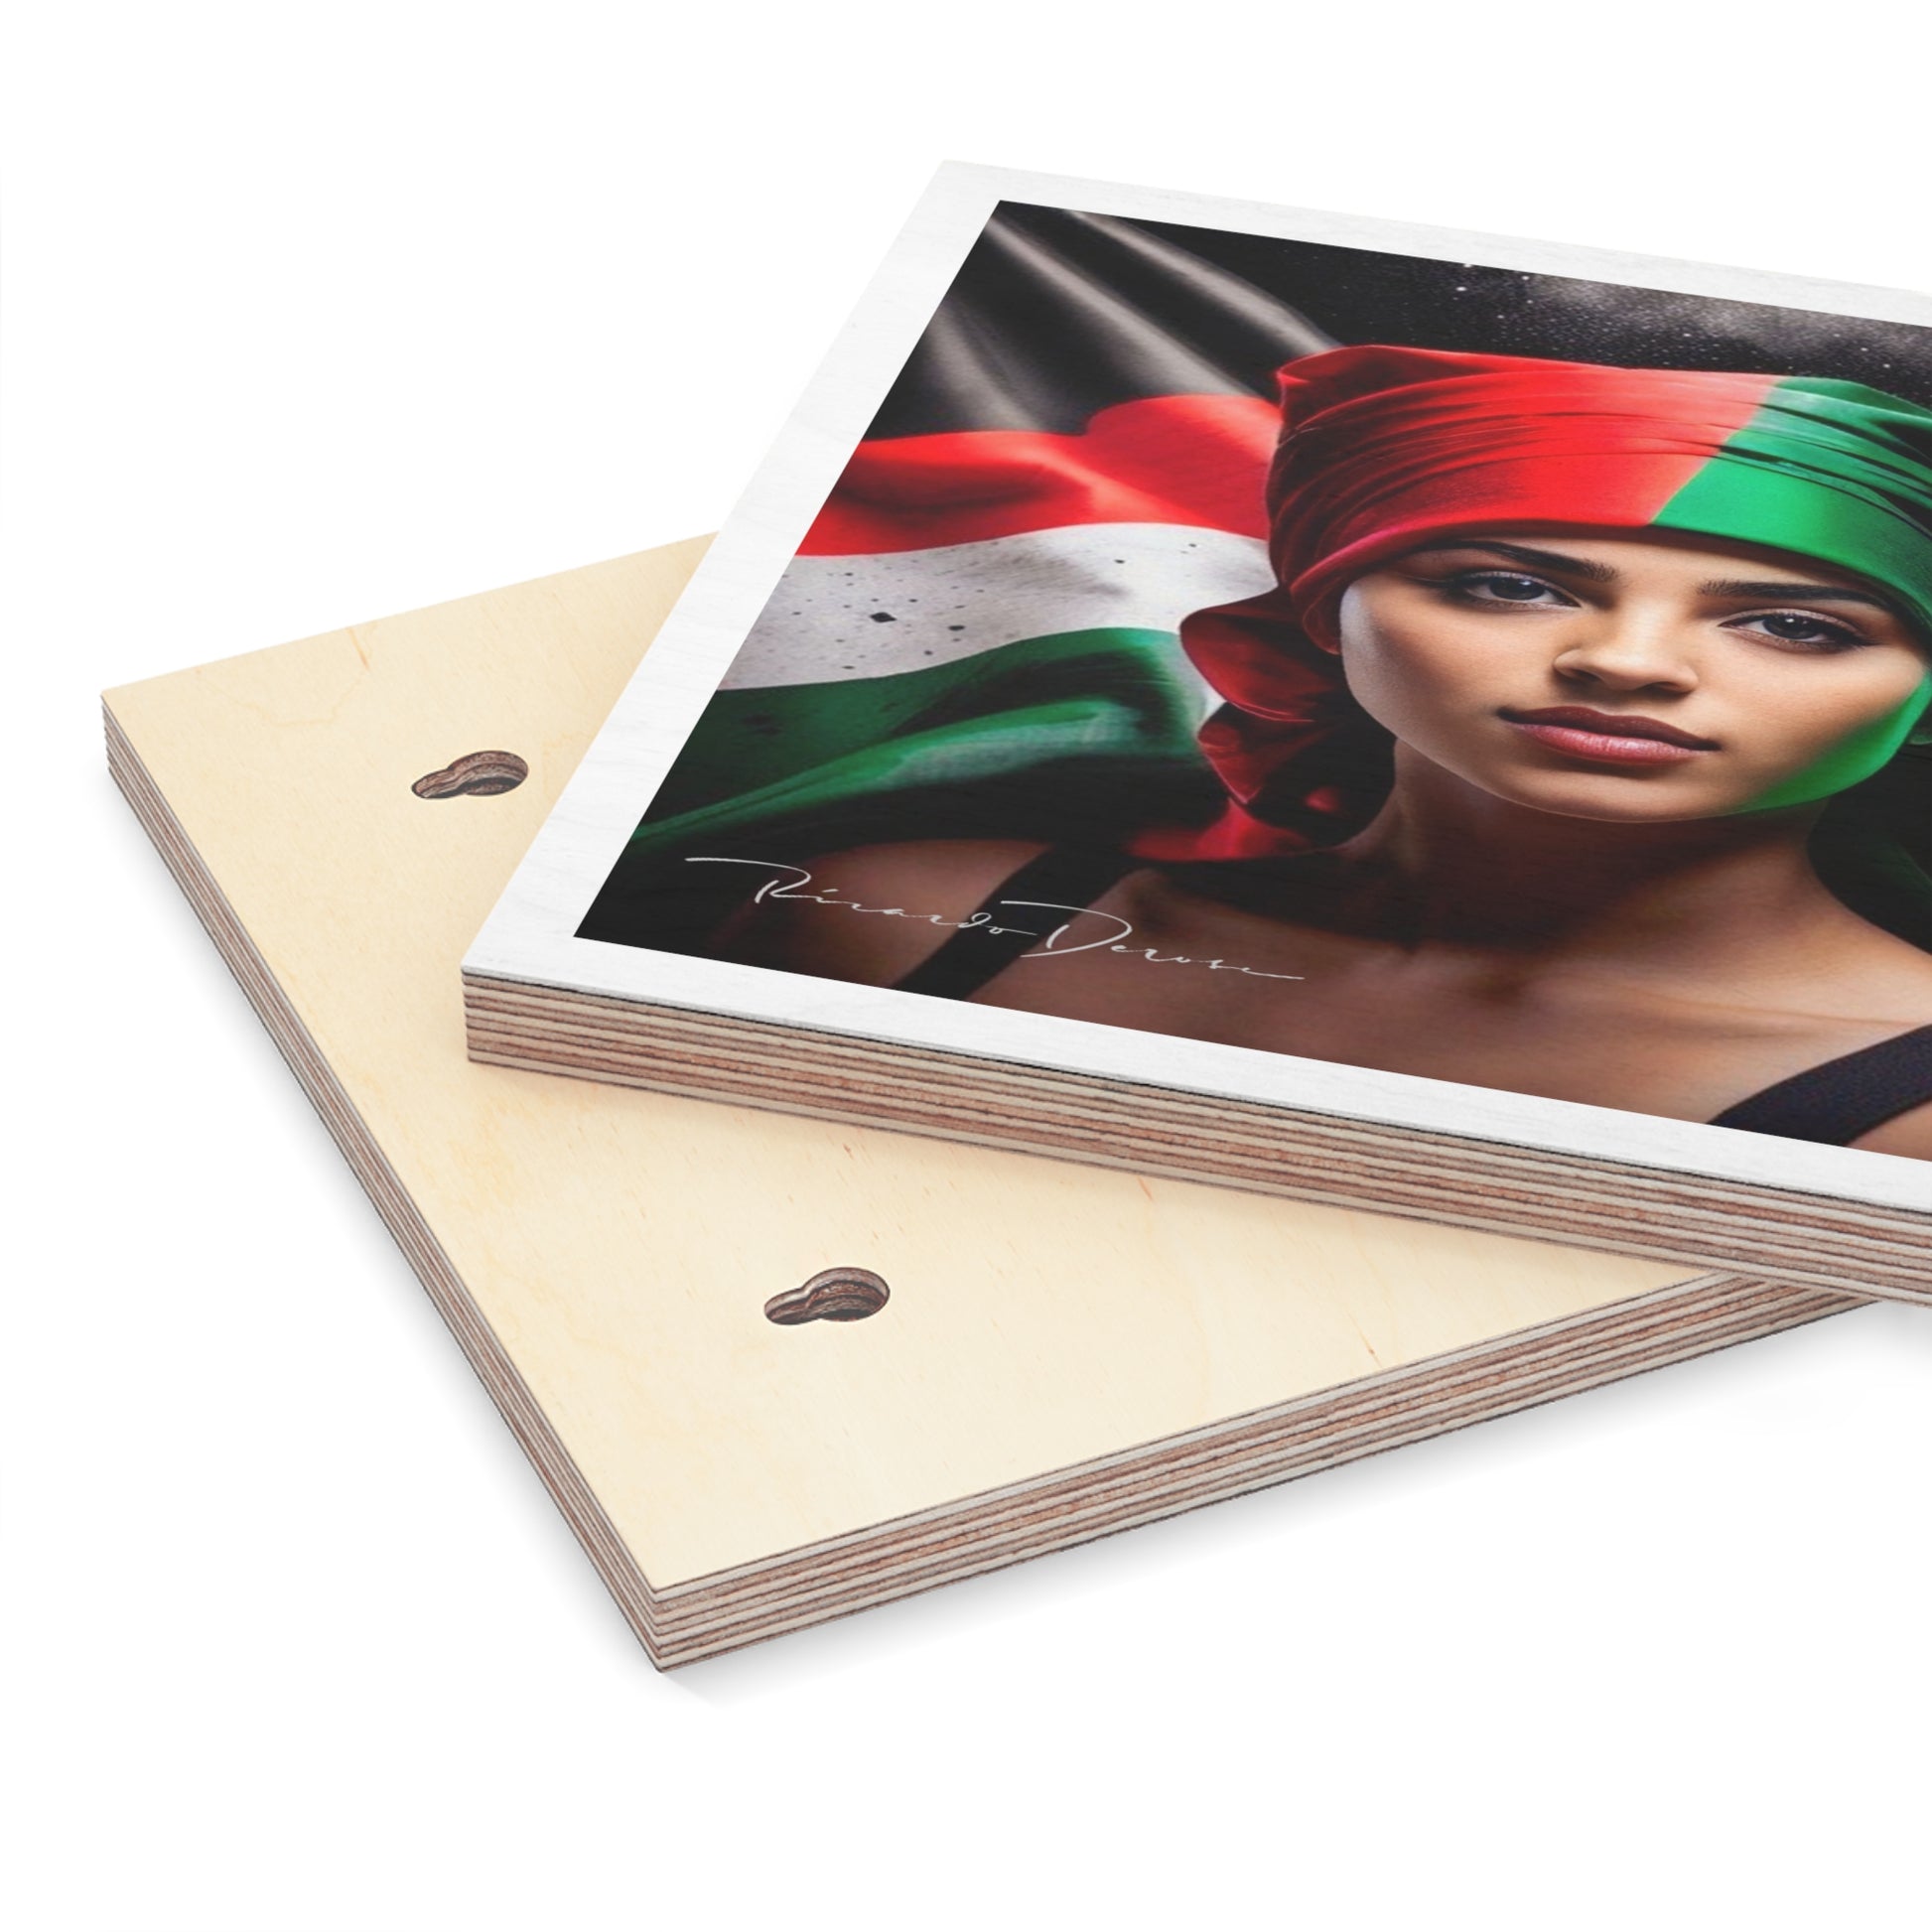 Free Palestine Young Lady Wood Canvas - Derose Entertainment 